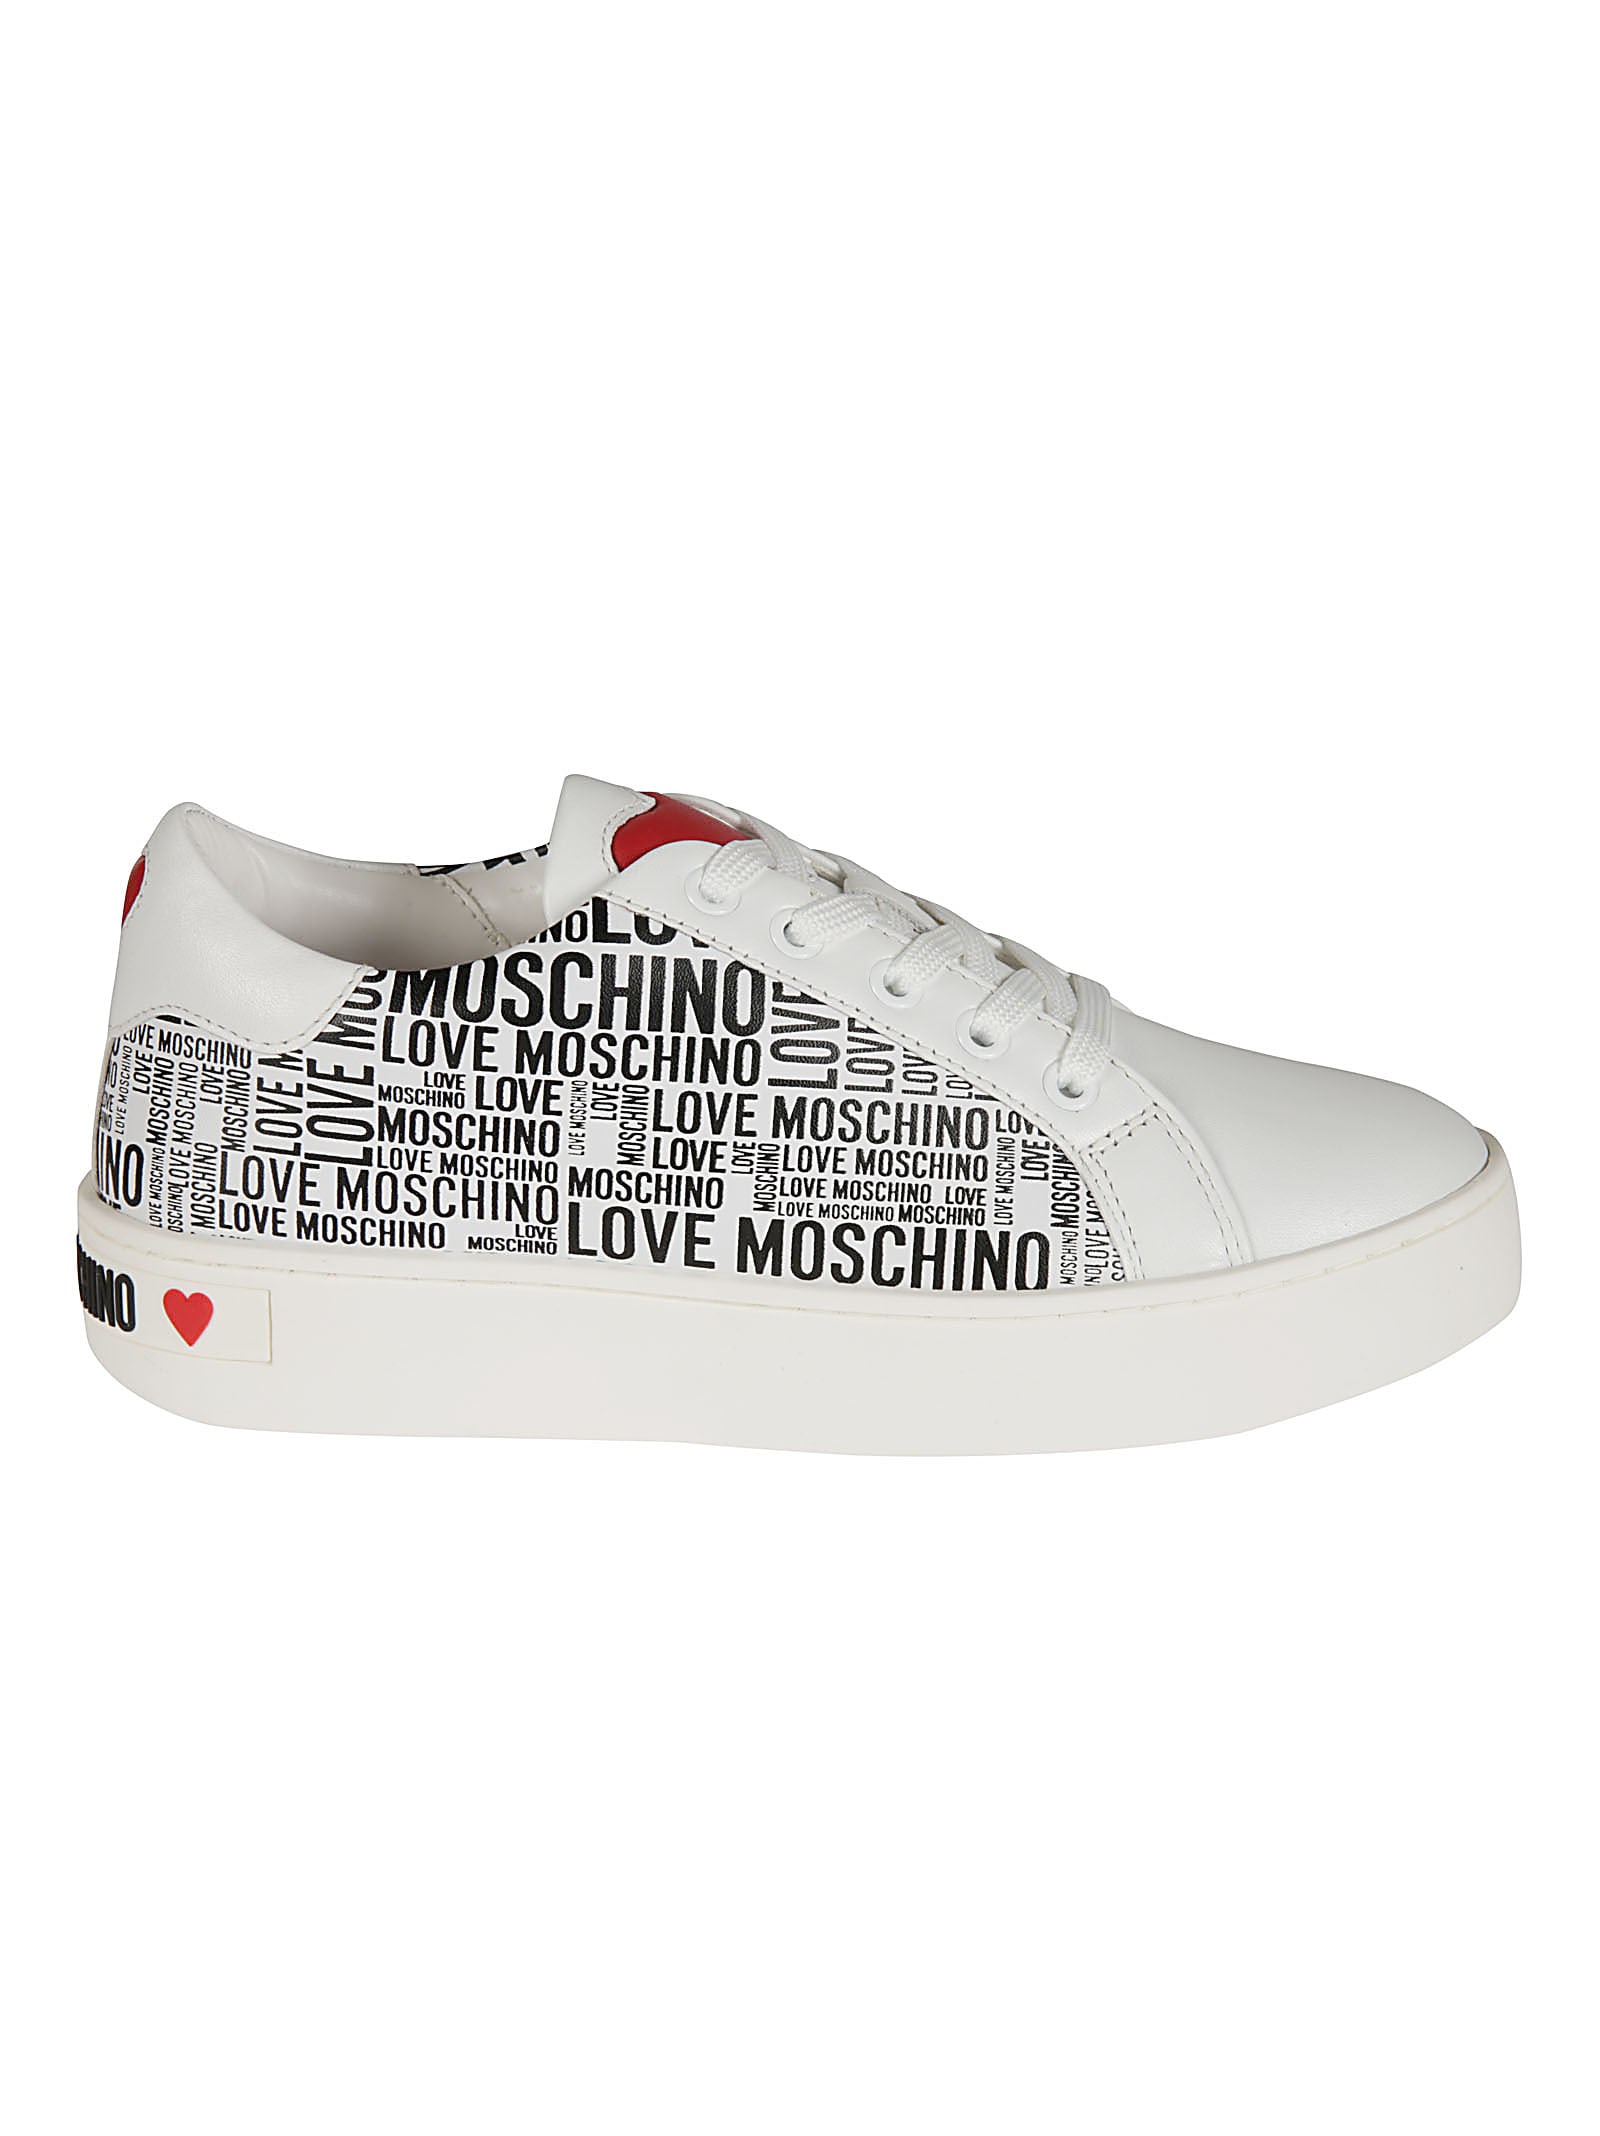 Buy Love Moschino Logo Printed Sneakers online, shop Love Moschino shoes with free shipping